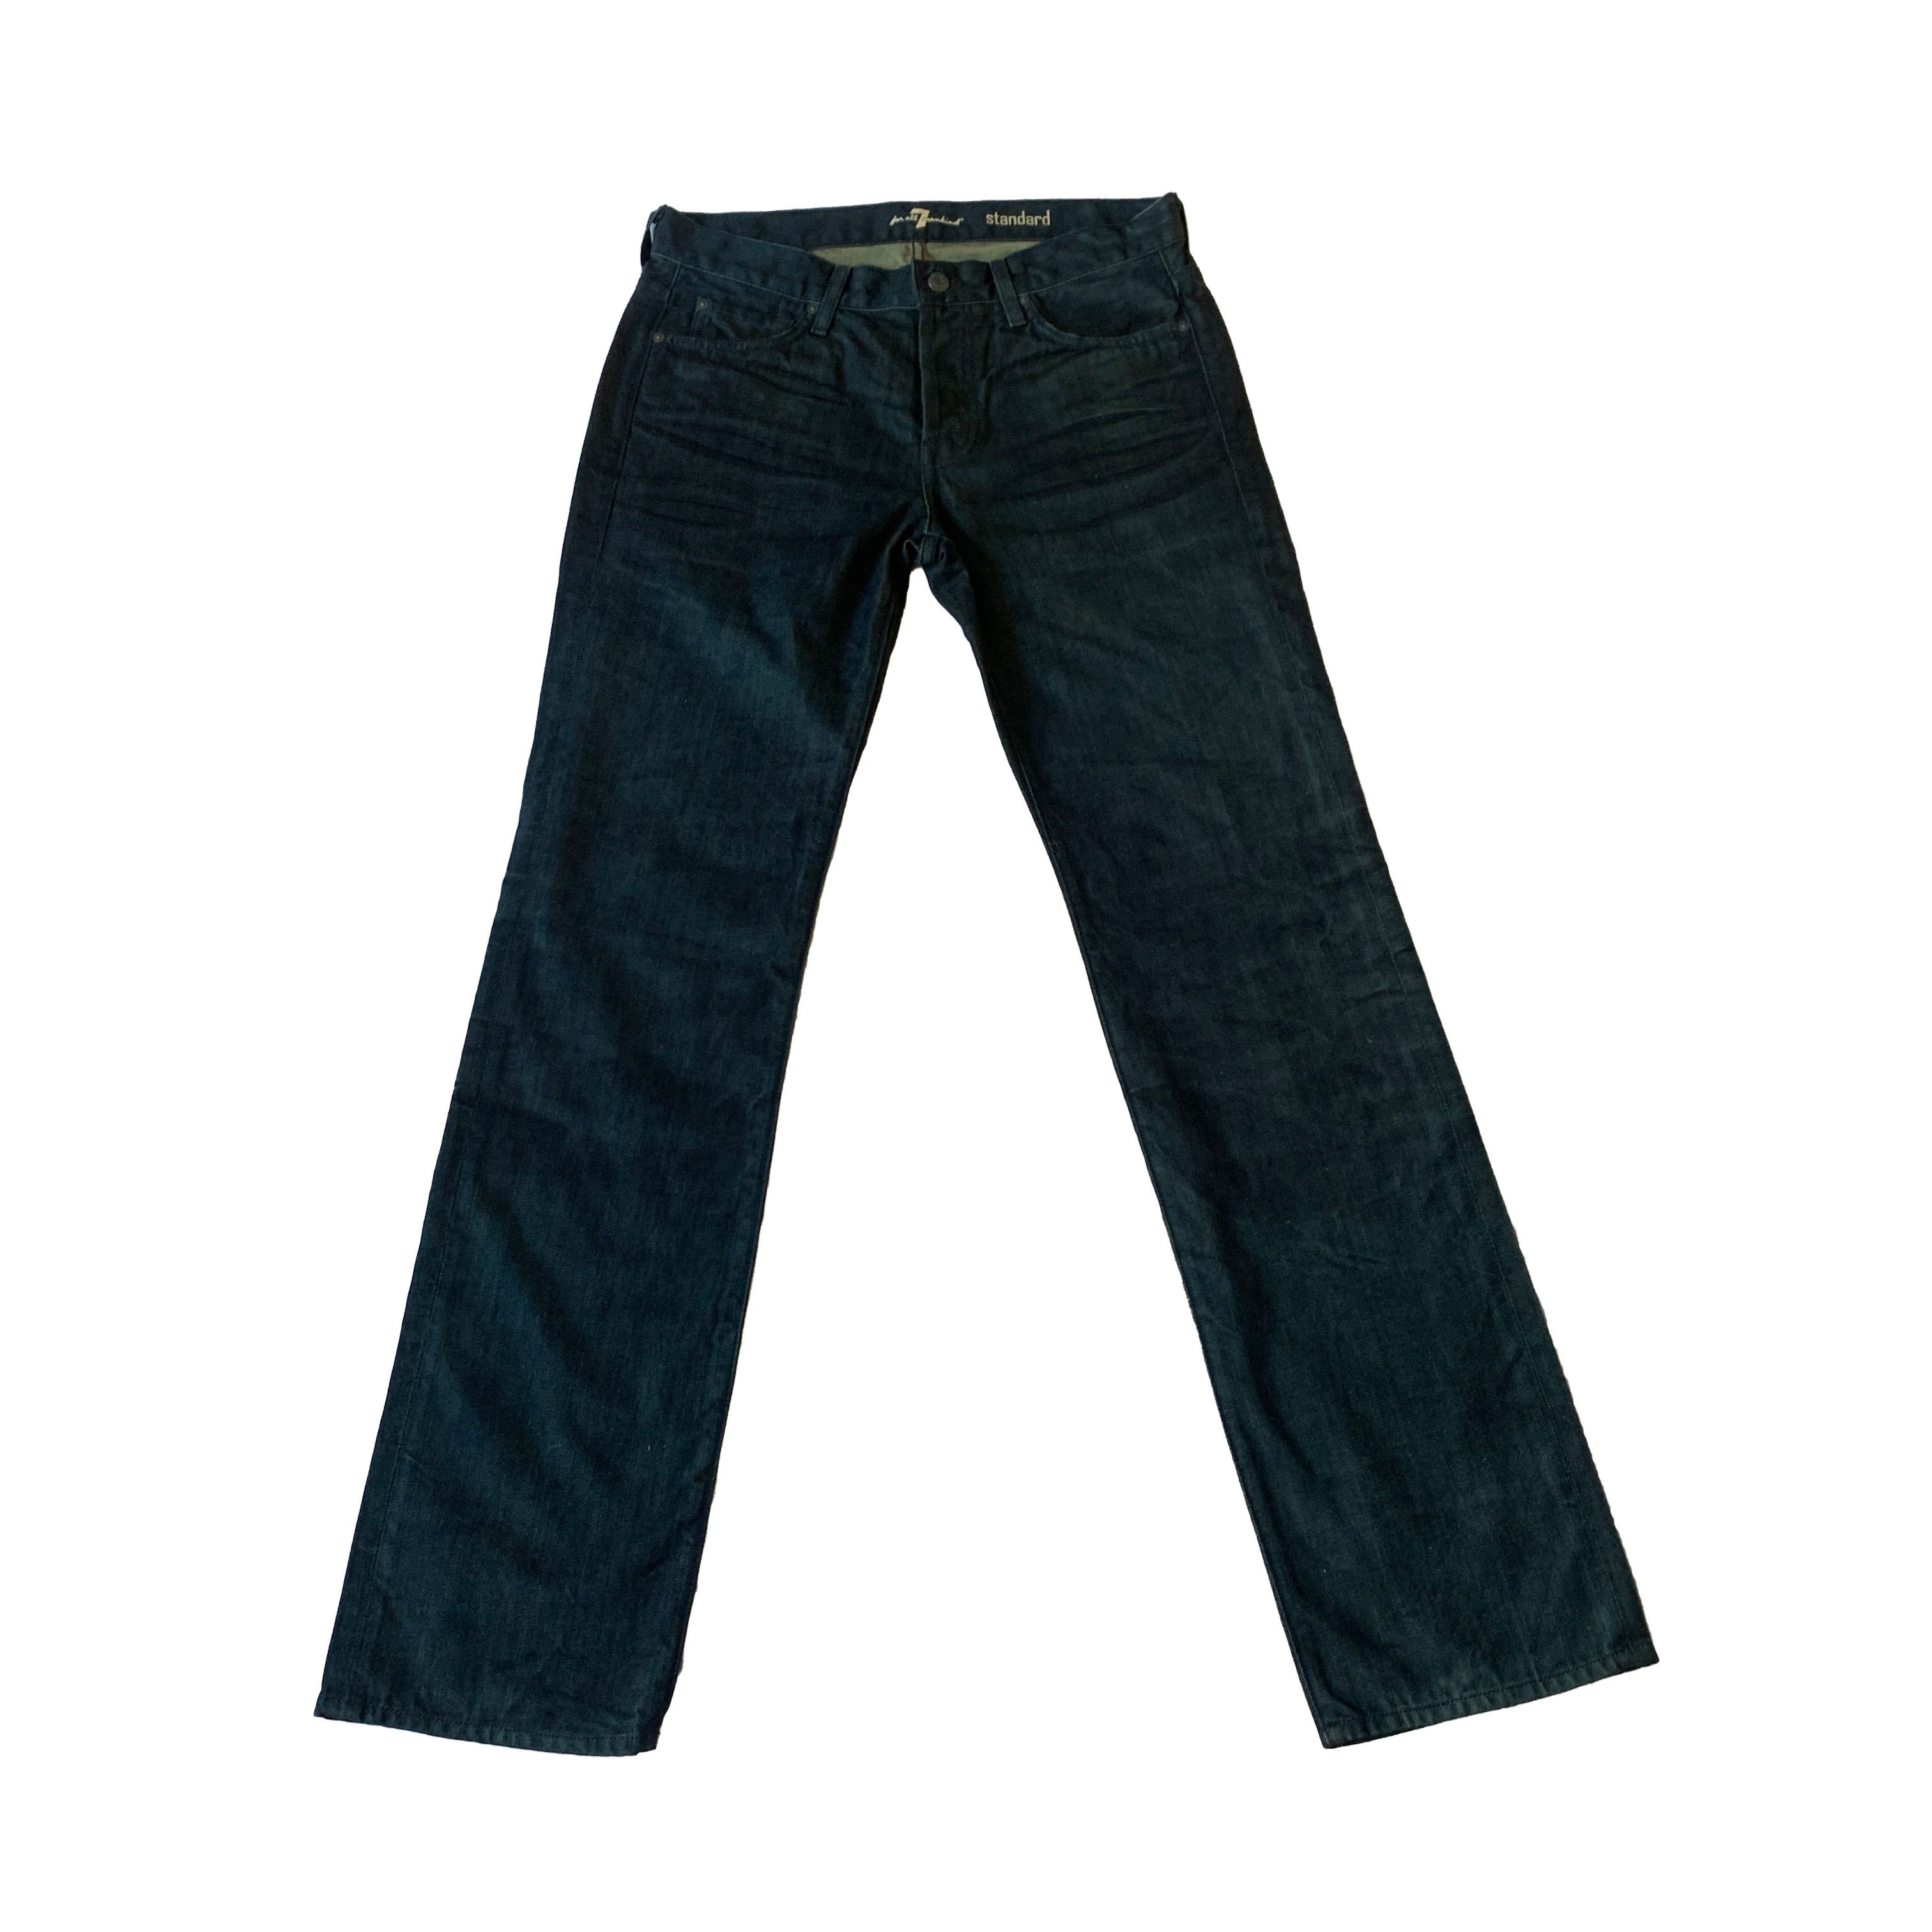 Jean 7 for all mankind